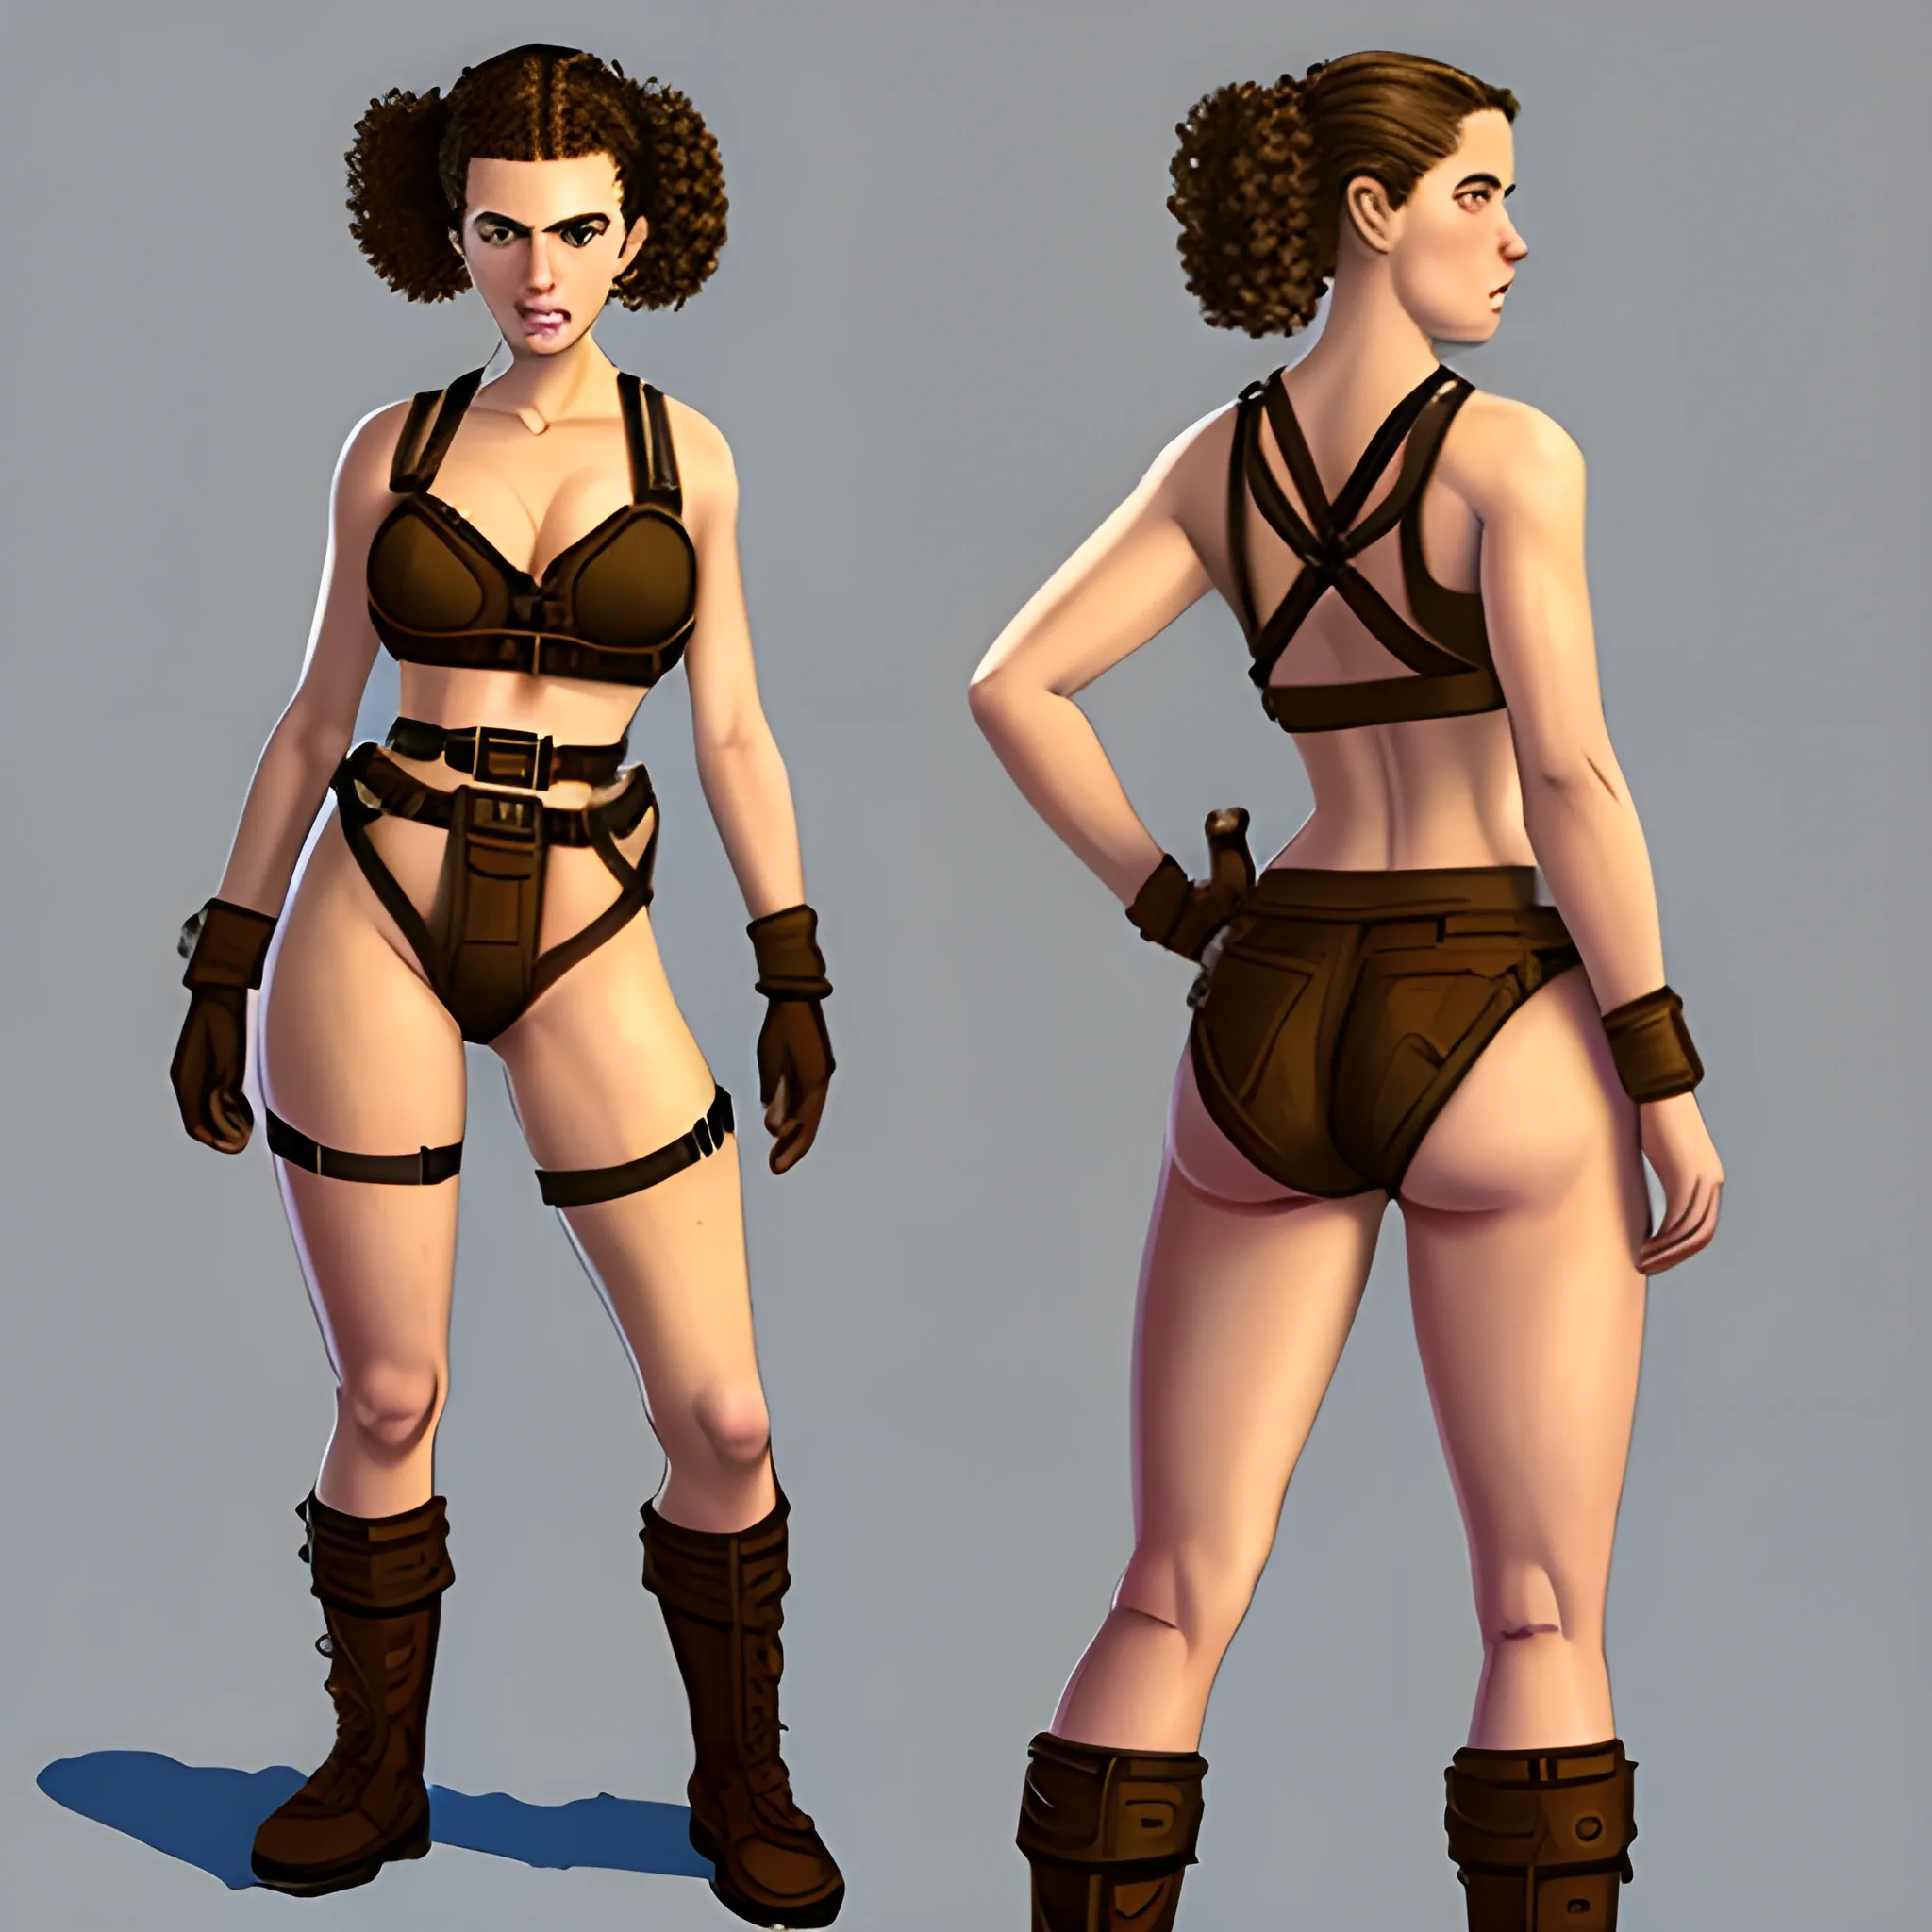 In the style of fallout 1, (masterpiece), (portrait photography), pixel art, (portrait of 20 years old Caucasian female), no makeup, flat chested, harness outfit made out of straps, no bra, no bikini, average face, an average looking Caucasian woman, curly ponytail, curly ponytail brown hair, (brown eyes), (full body), Centered image, character sheet, concept art full body image